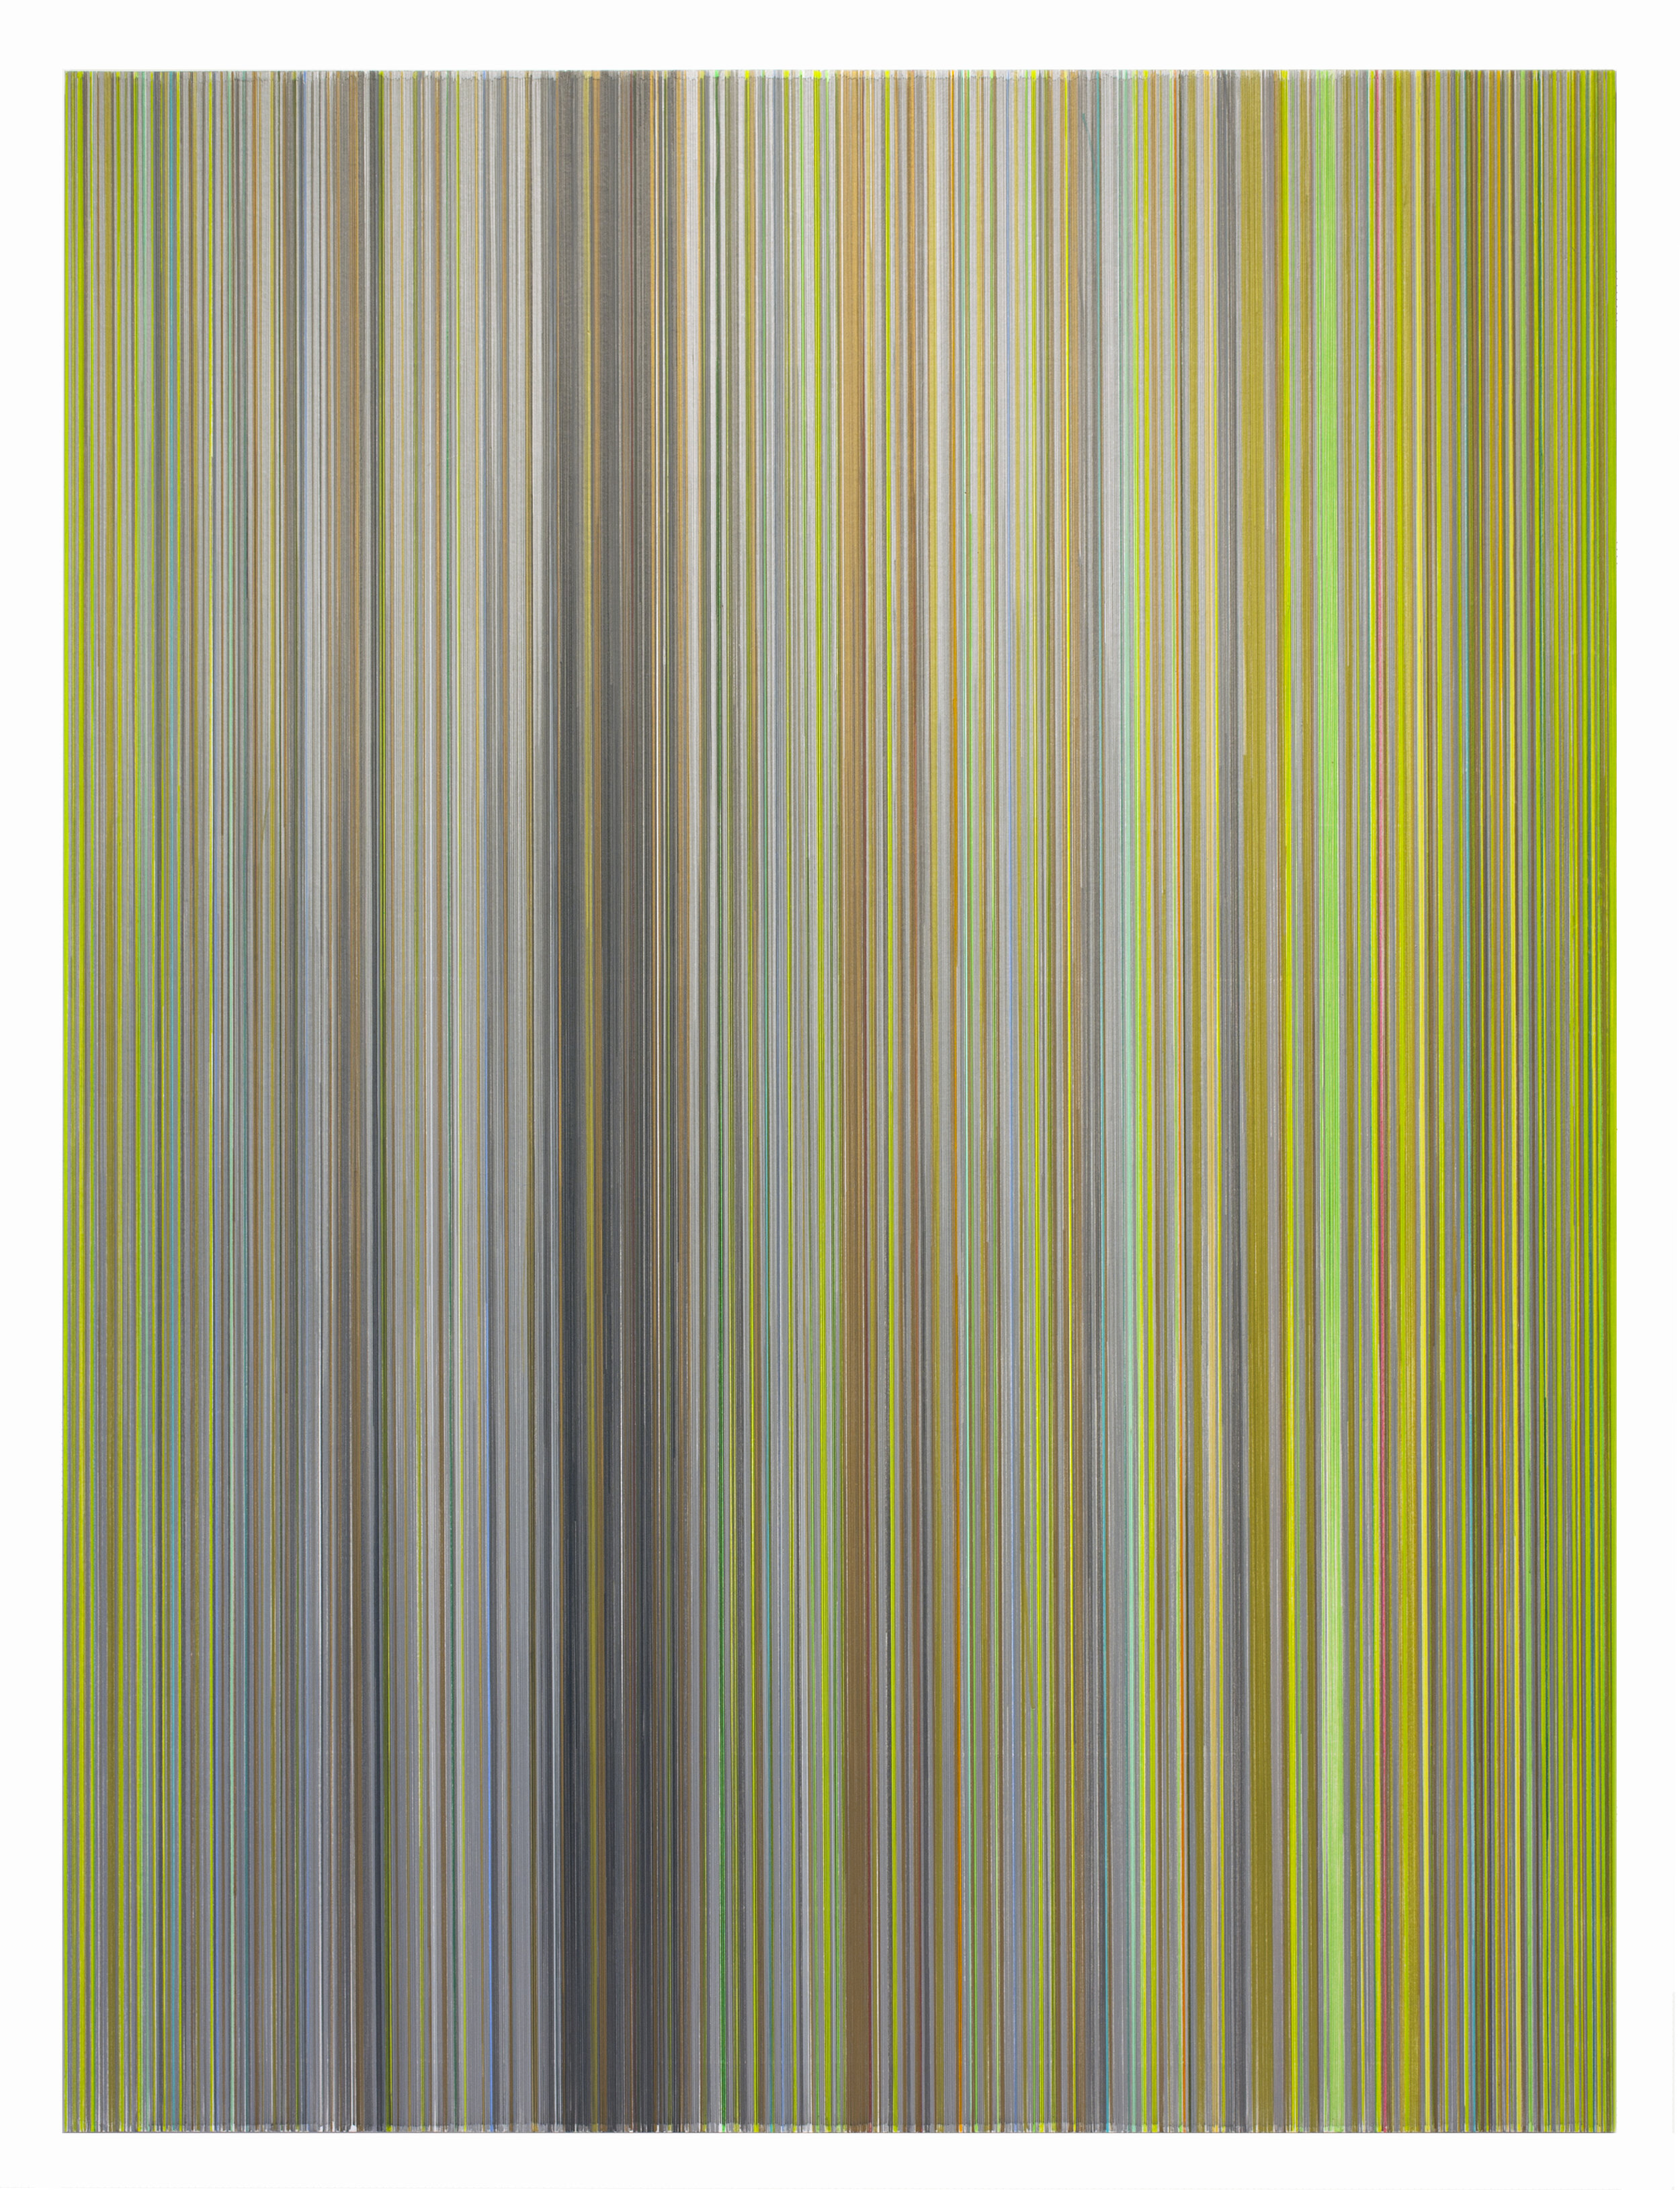    to the next nearest there   2017 graphite and colored pencil on mat board 60 x 80 inches title attributed to William Wordsworth private collection, Dallas, TX   